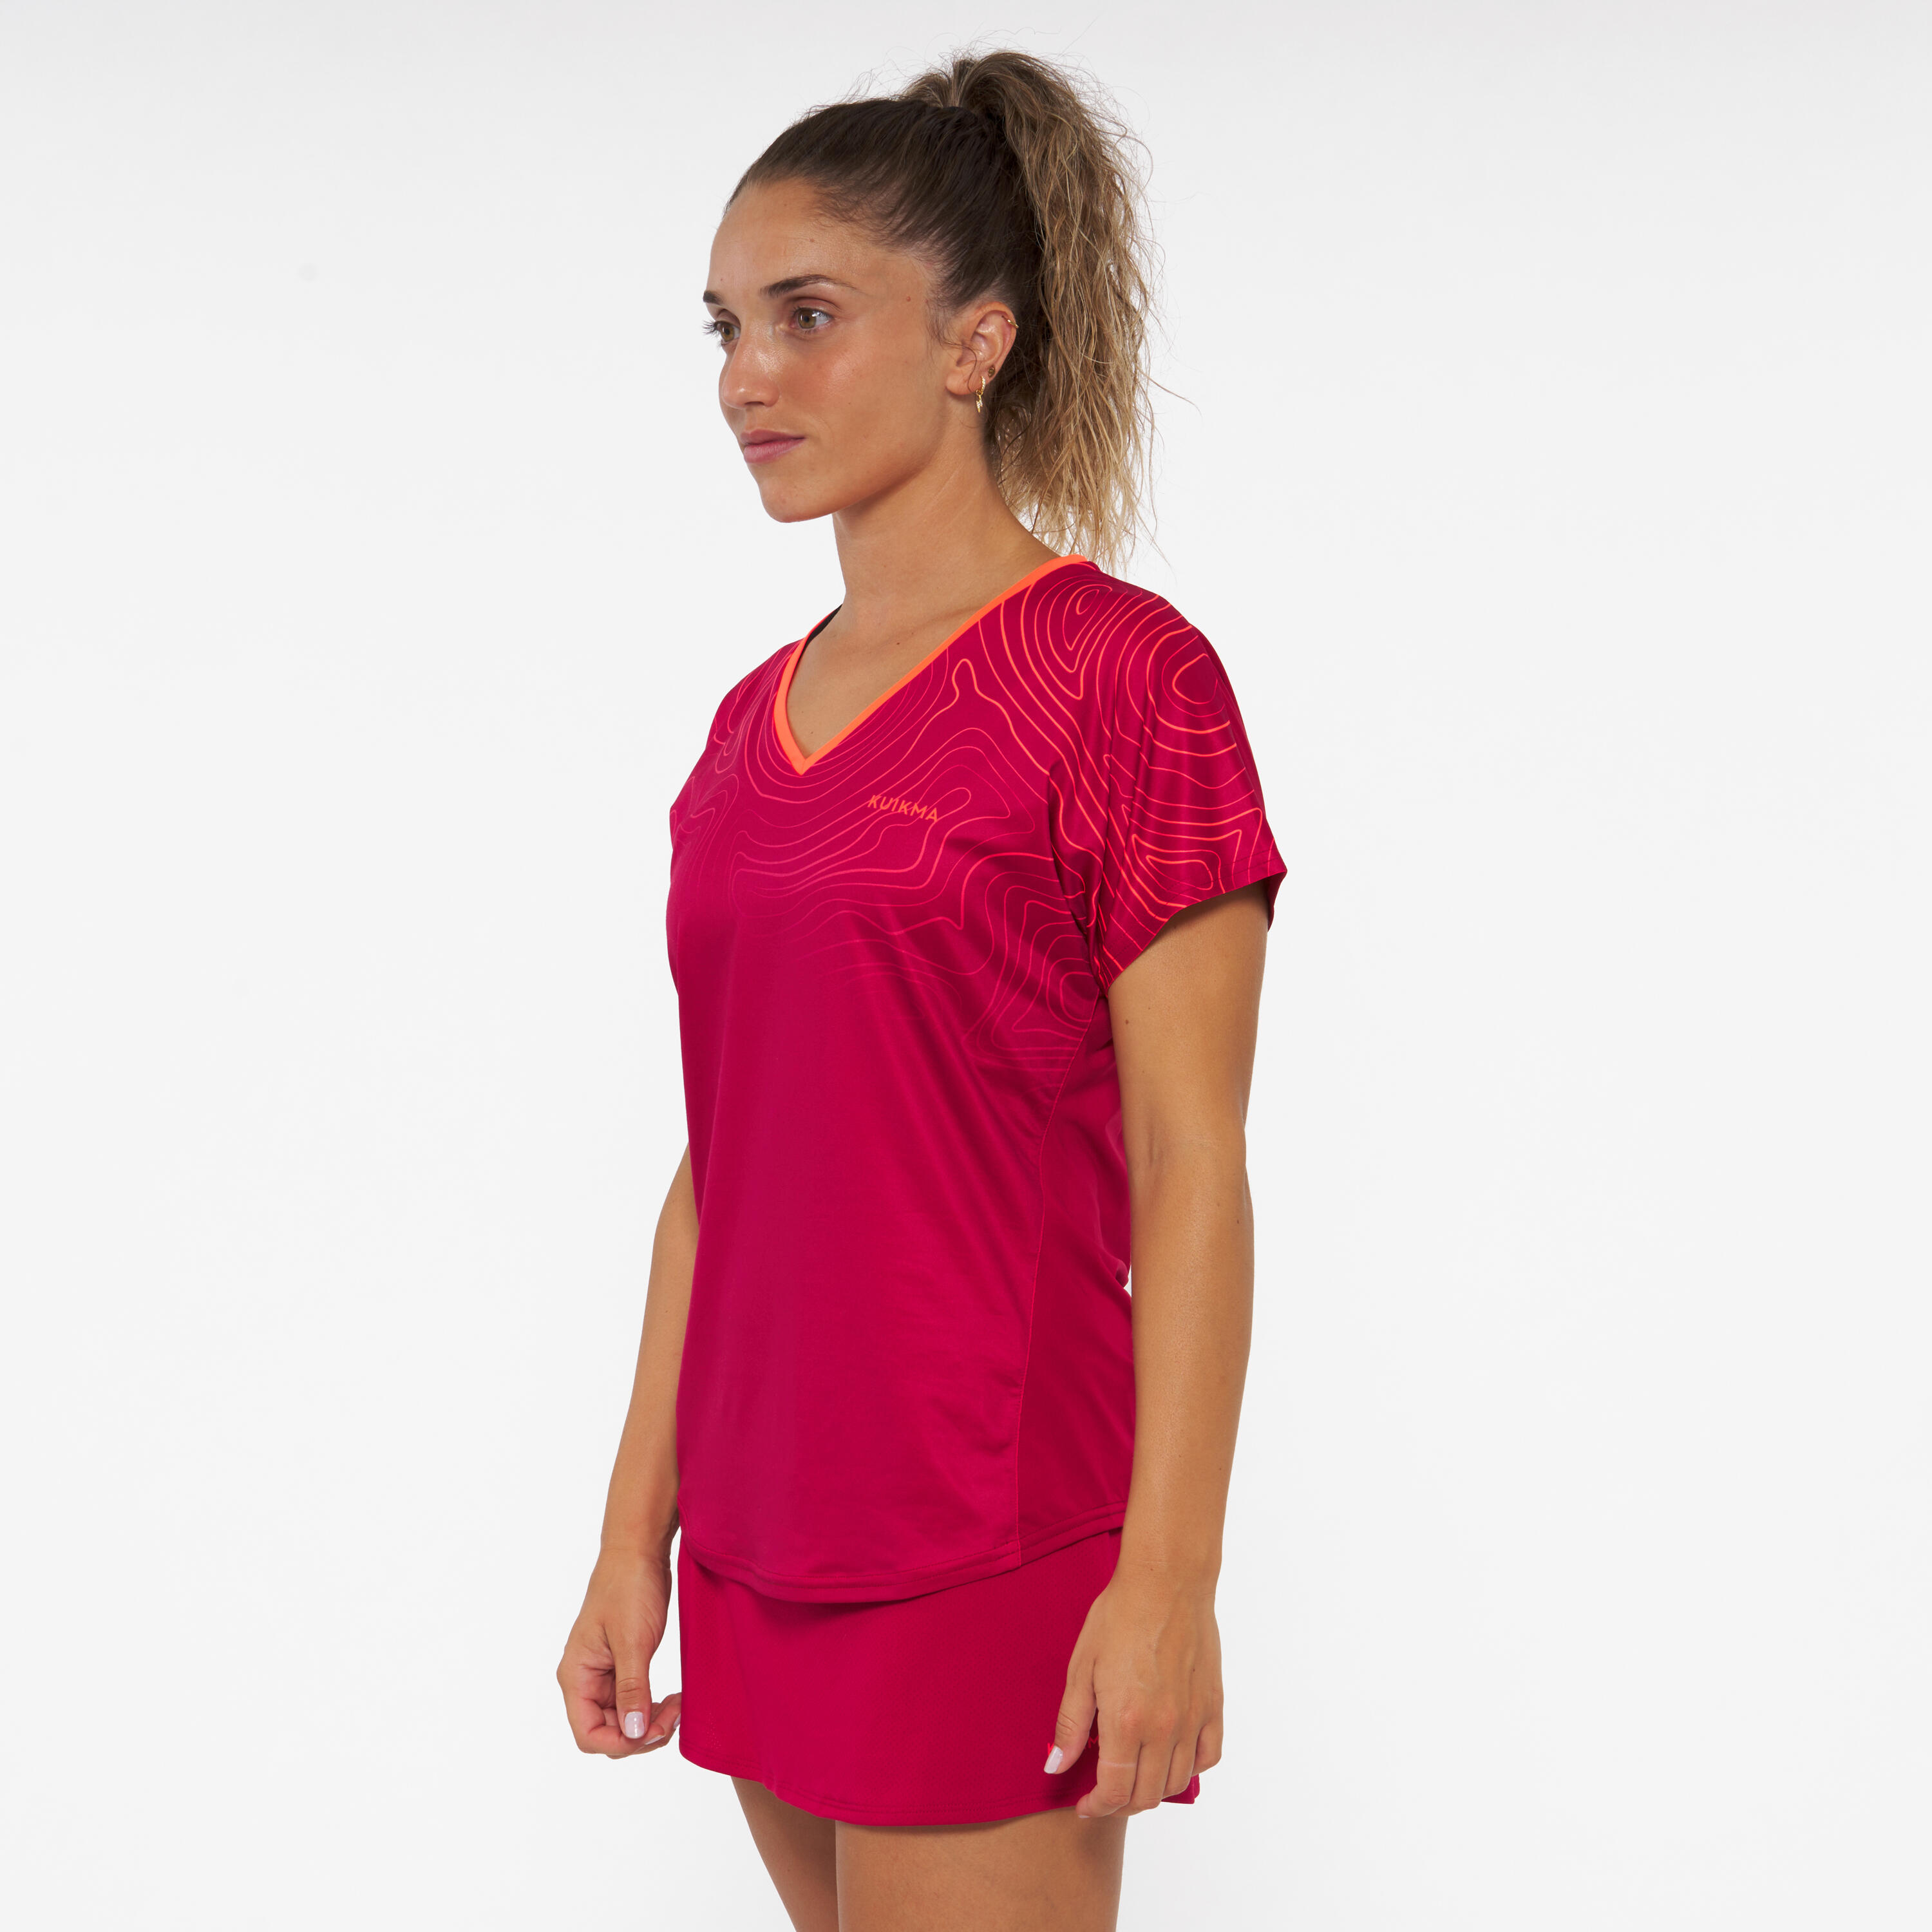 Women's Breathable Short-Sleeved Padel T-Shirt 500 - Red 3/7